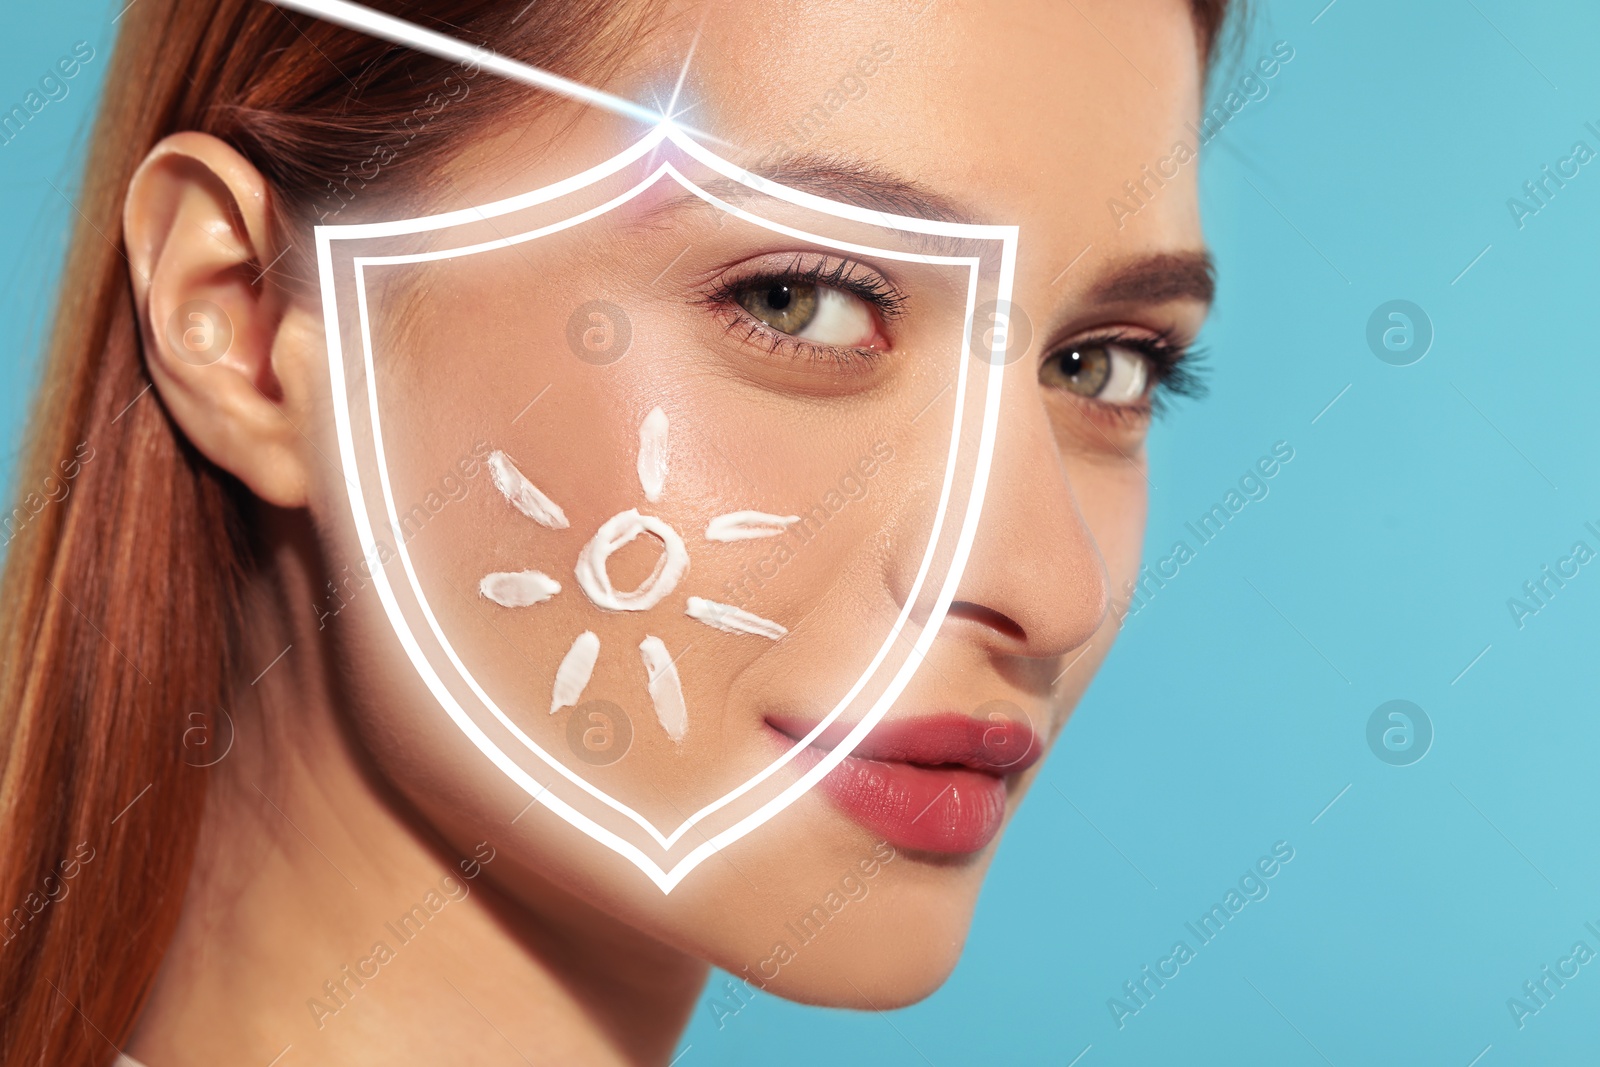 Image of Sun protection care. Beautiful woman with sunscreen on face against light blue background, space for text. Illustration of shield as SPF